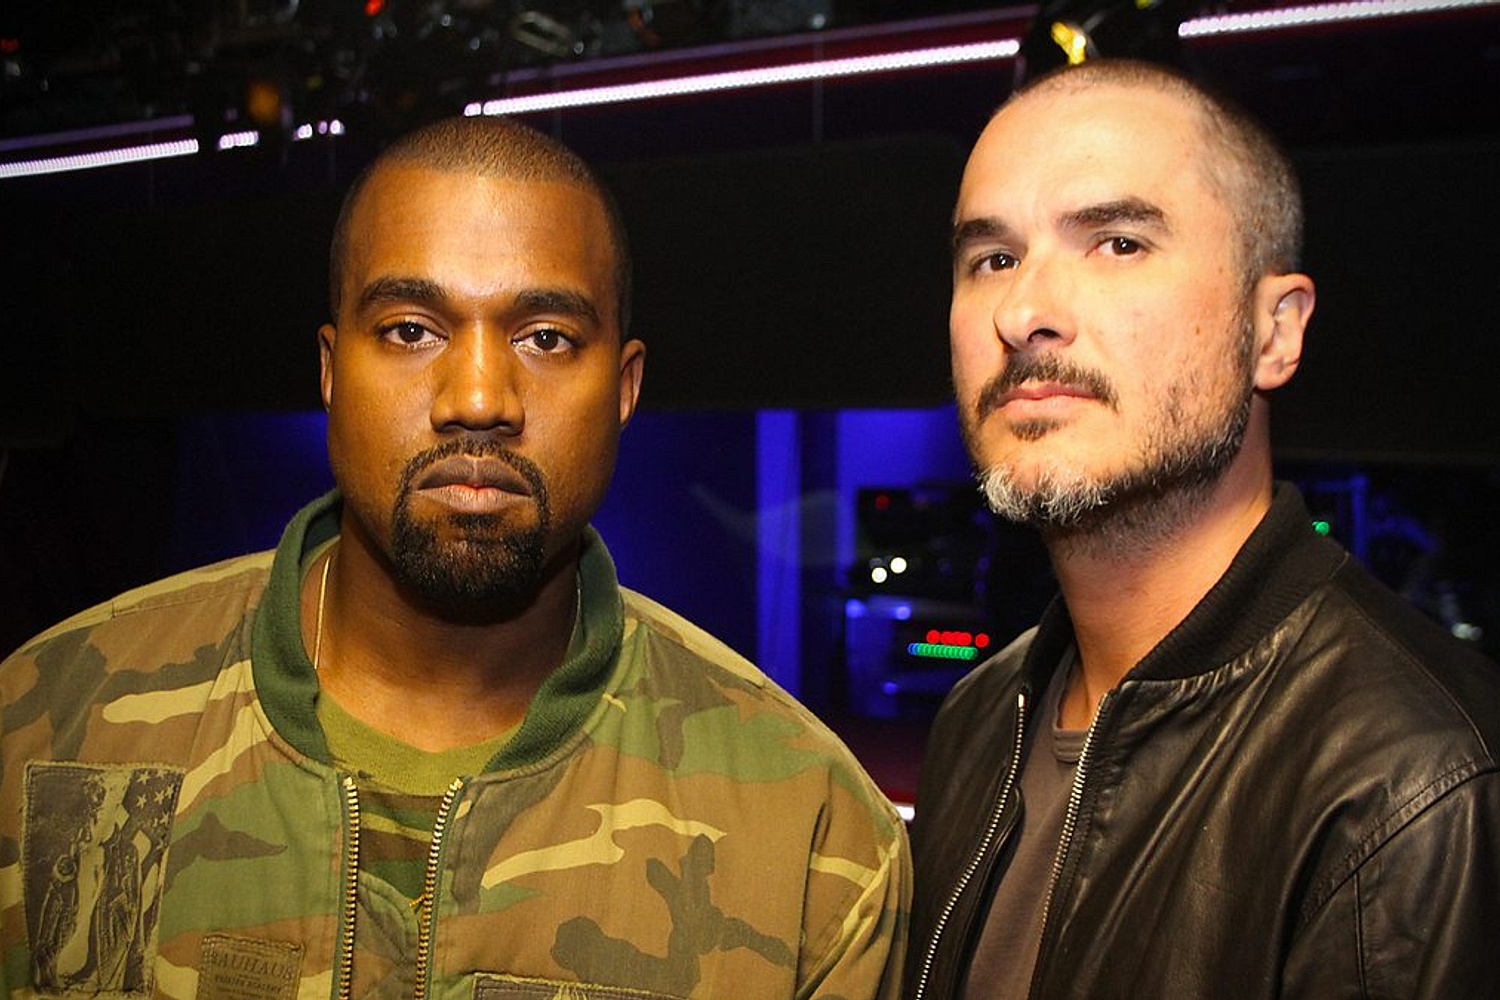 Watch Kanye West’s new interview with Zane Lowe in full